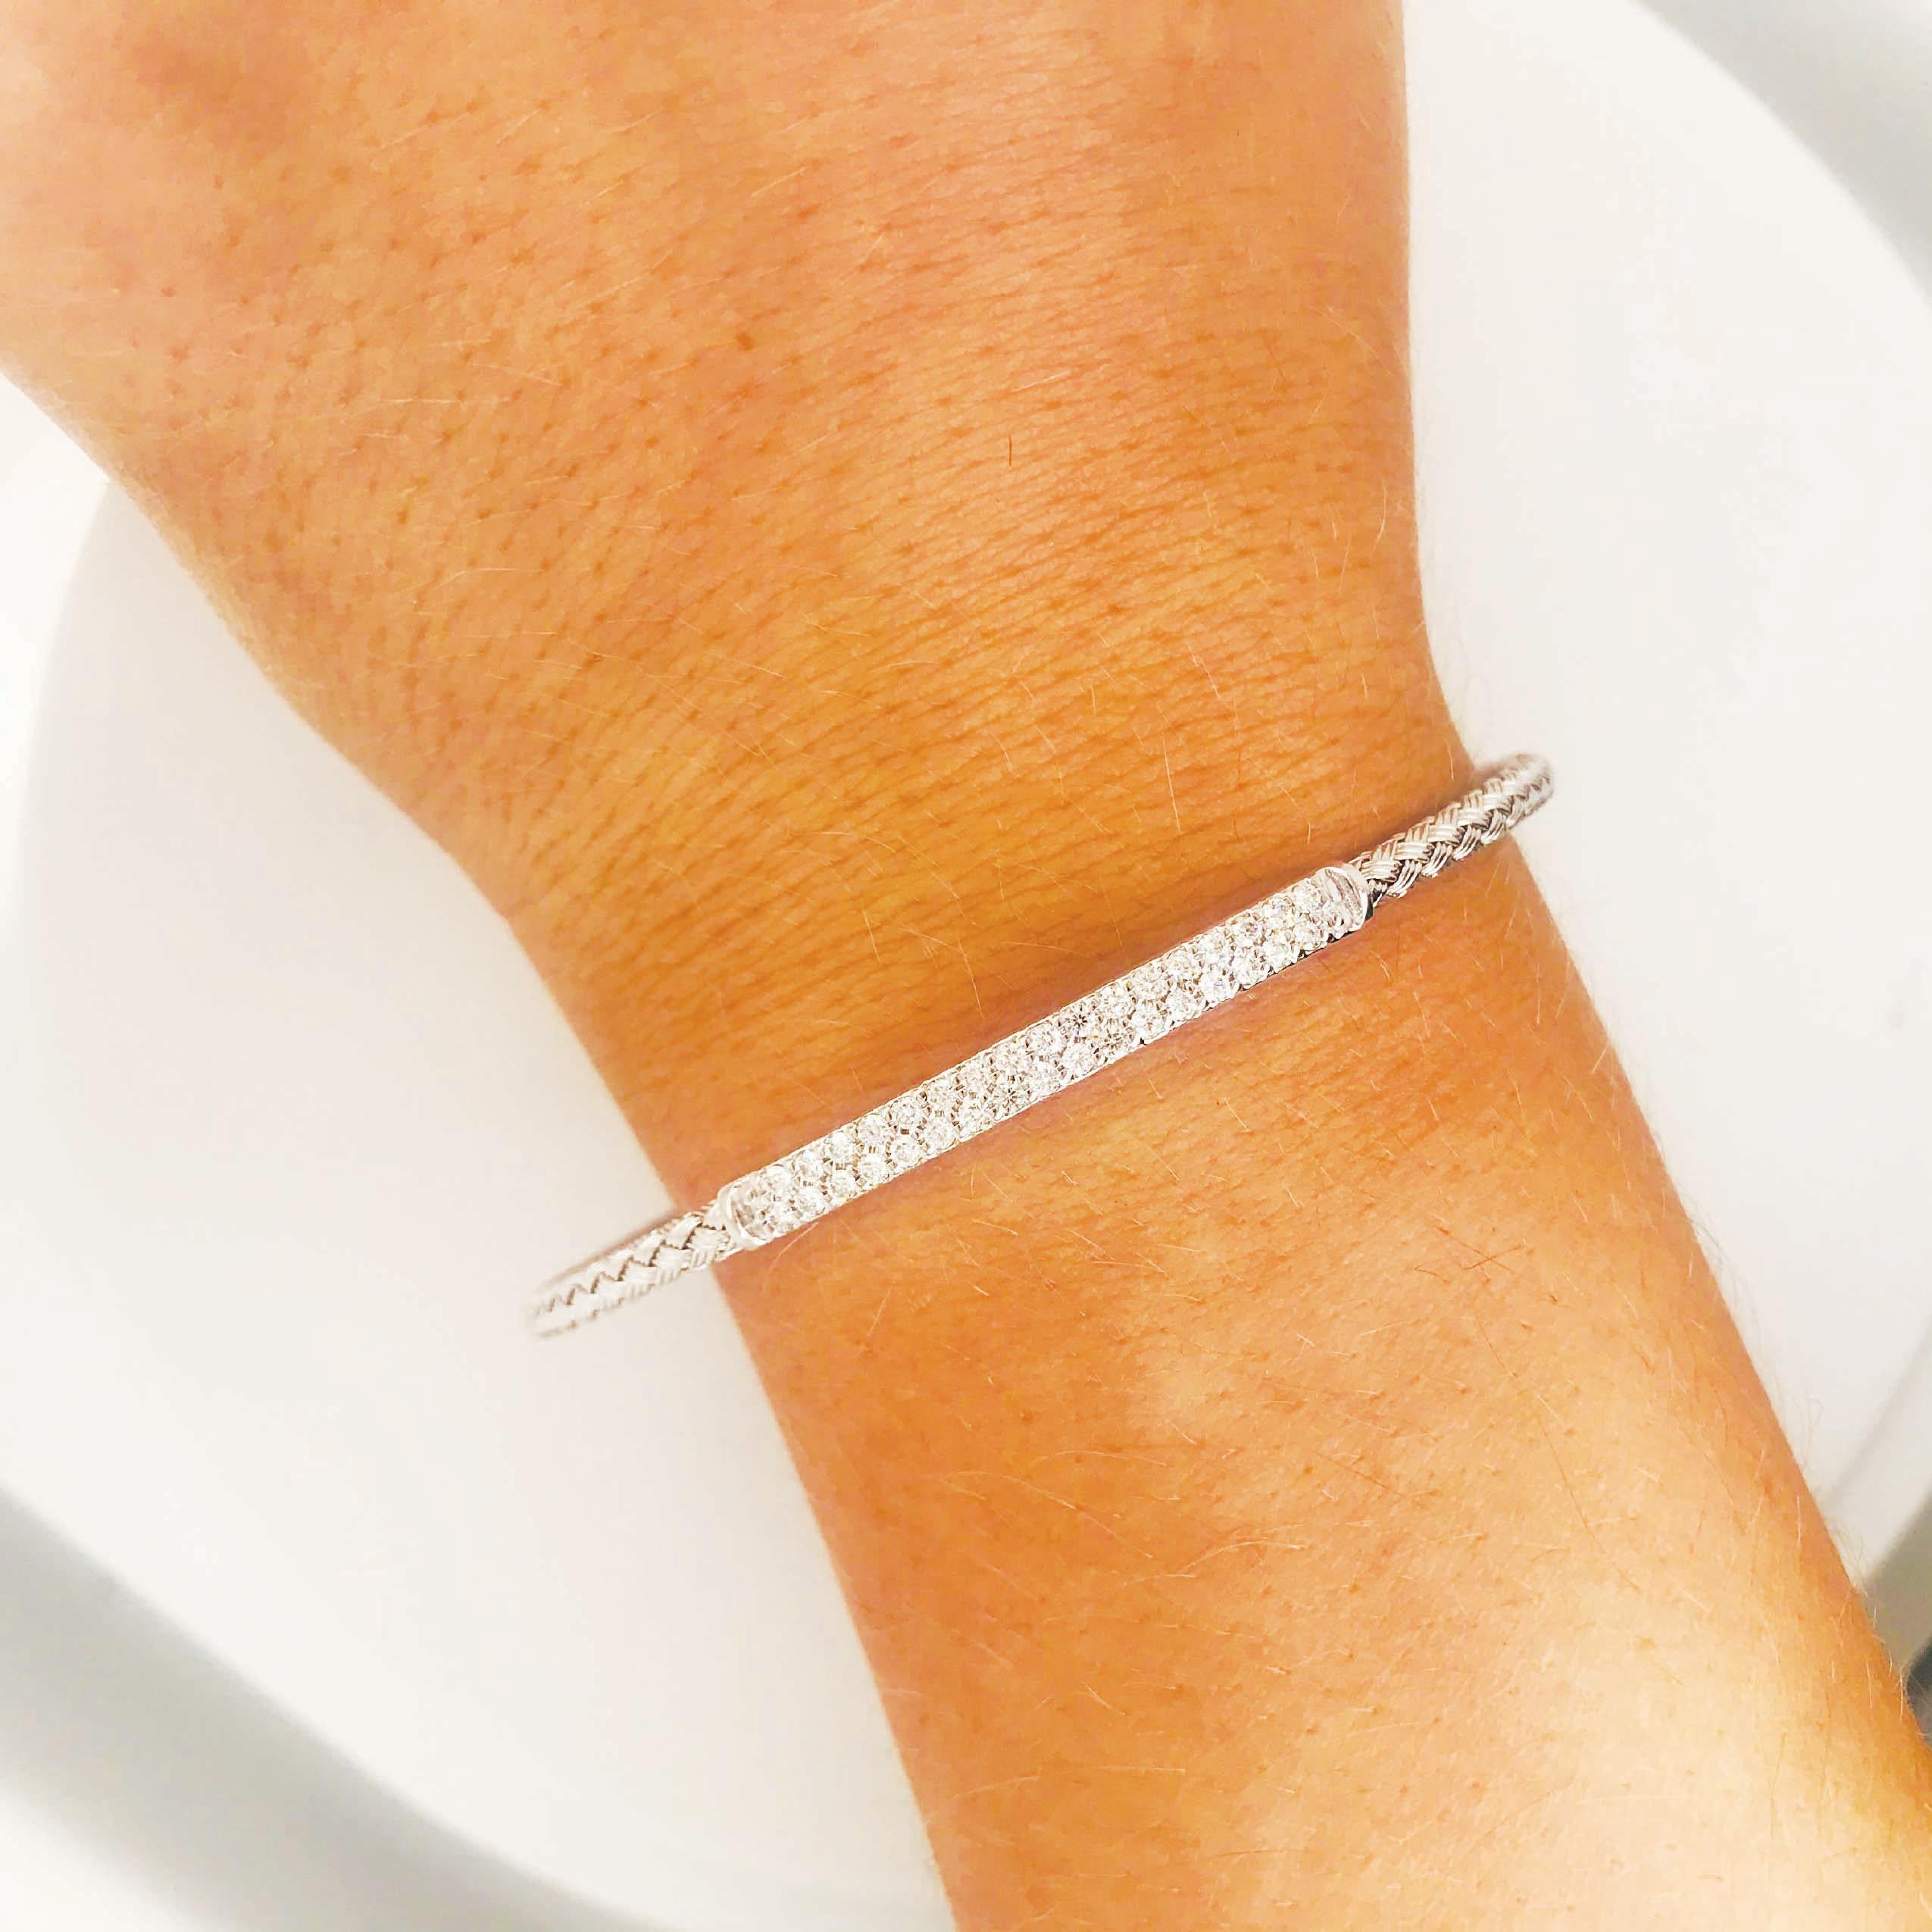 Diamond pave bar bracelet with unique flexible design! This bracelet has 34 round brilliant diamonds that sparkle beautifully in every setting. The bracelet is a cuff with an open back that sits perfectly on any arm. The bracelet has a woven design